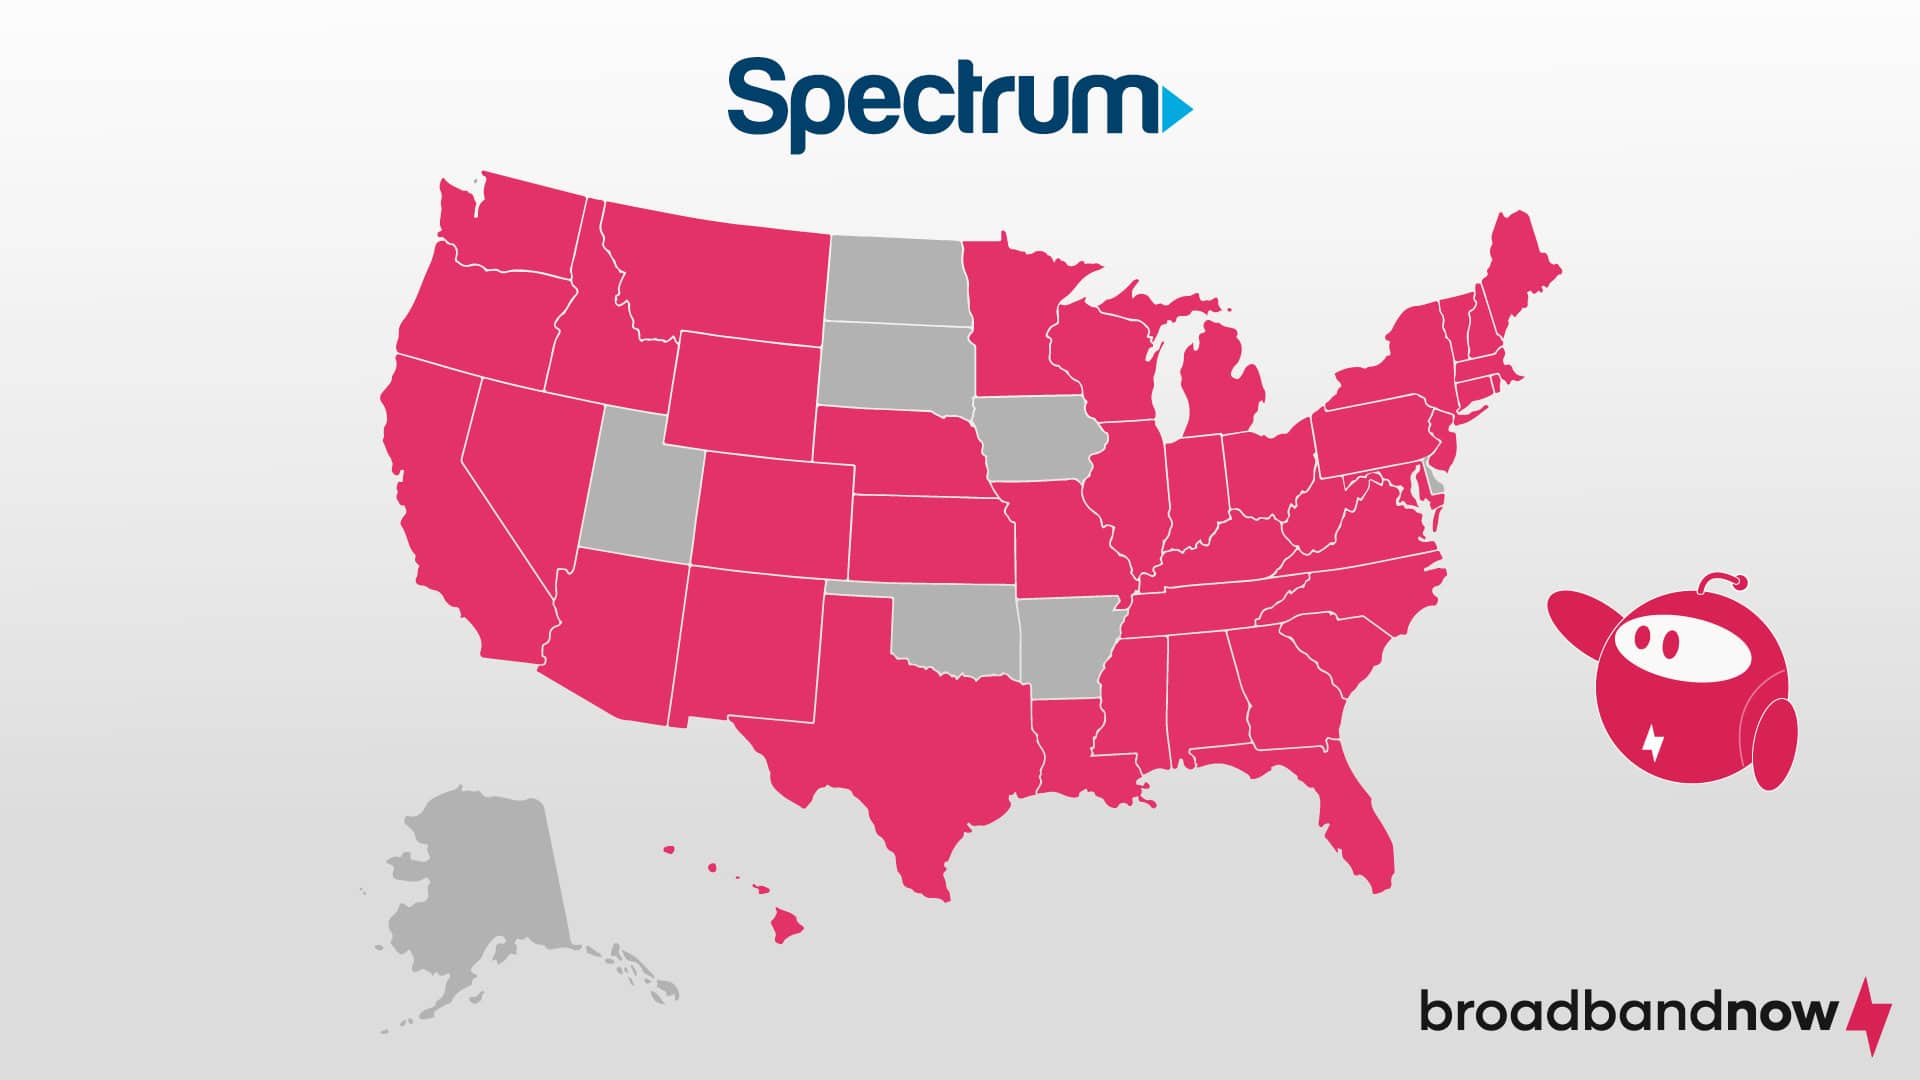 Map of broadband availability from Spectrum.